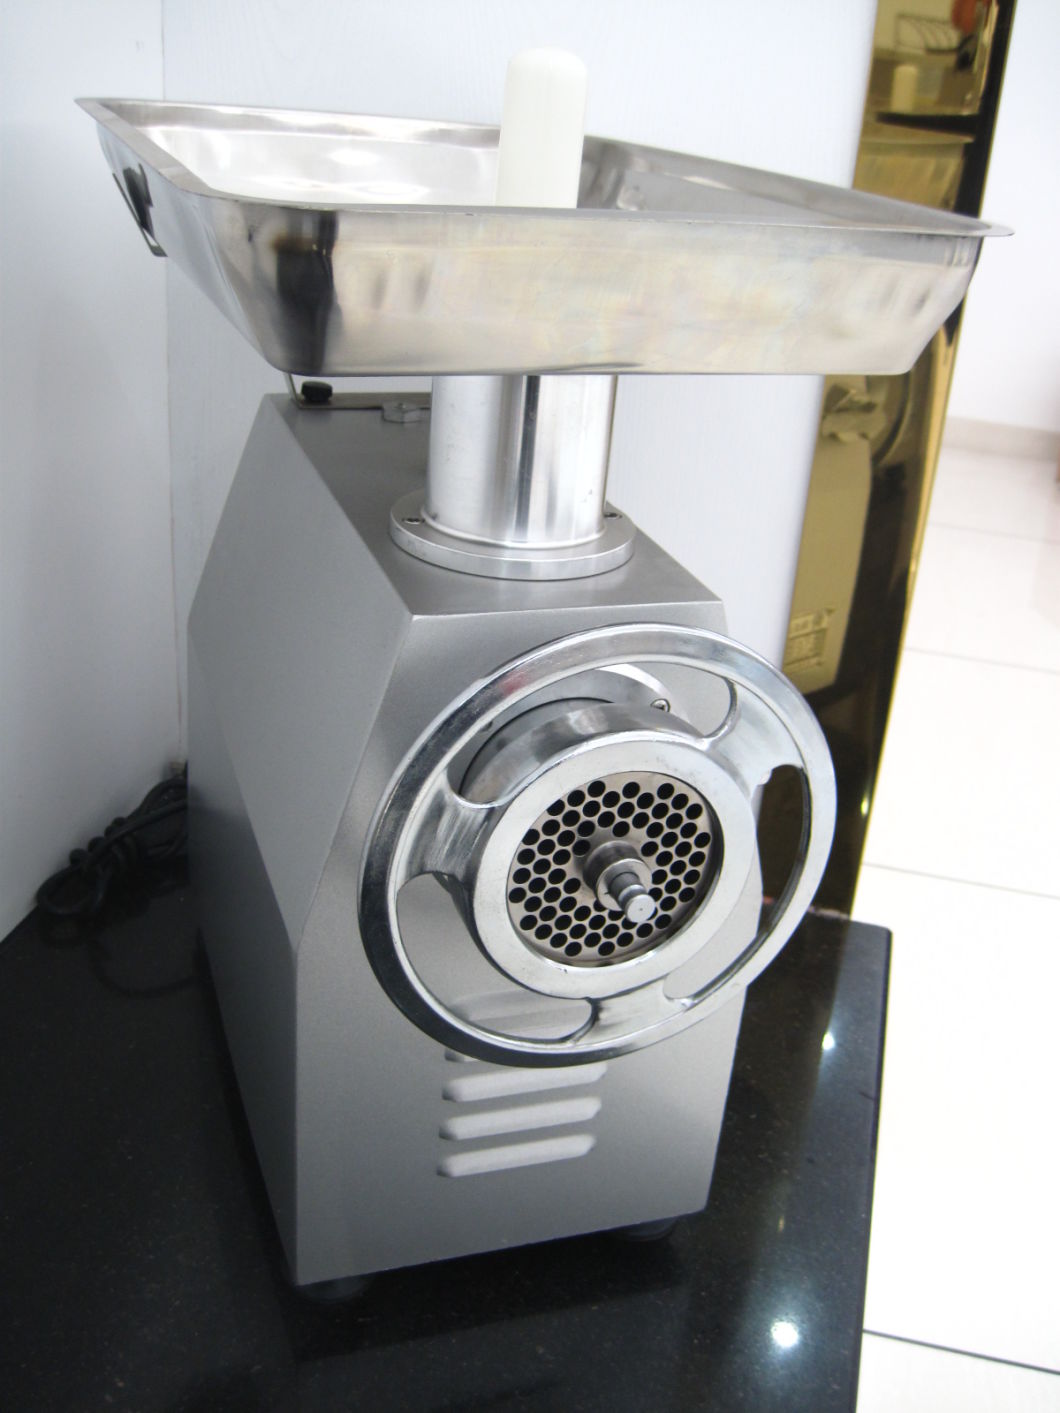 GRT-MC32P Hot Selling Commercial Electric Meat Grinder for Sale